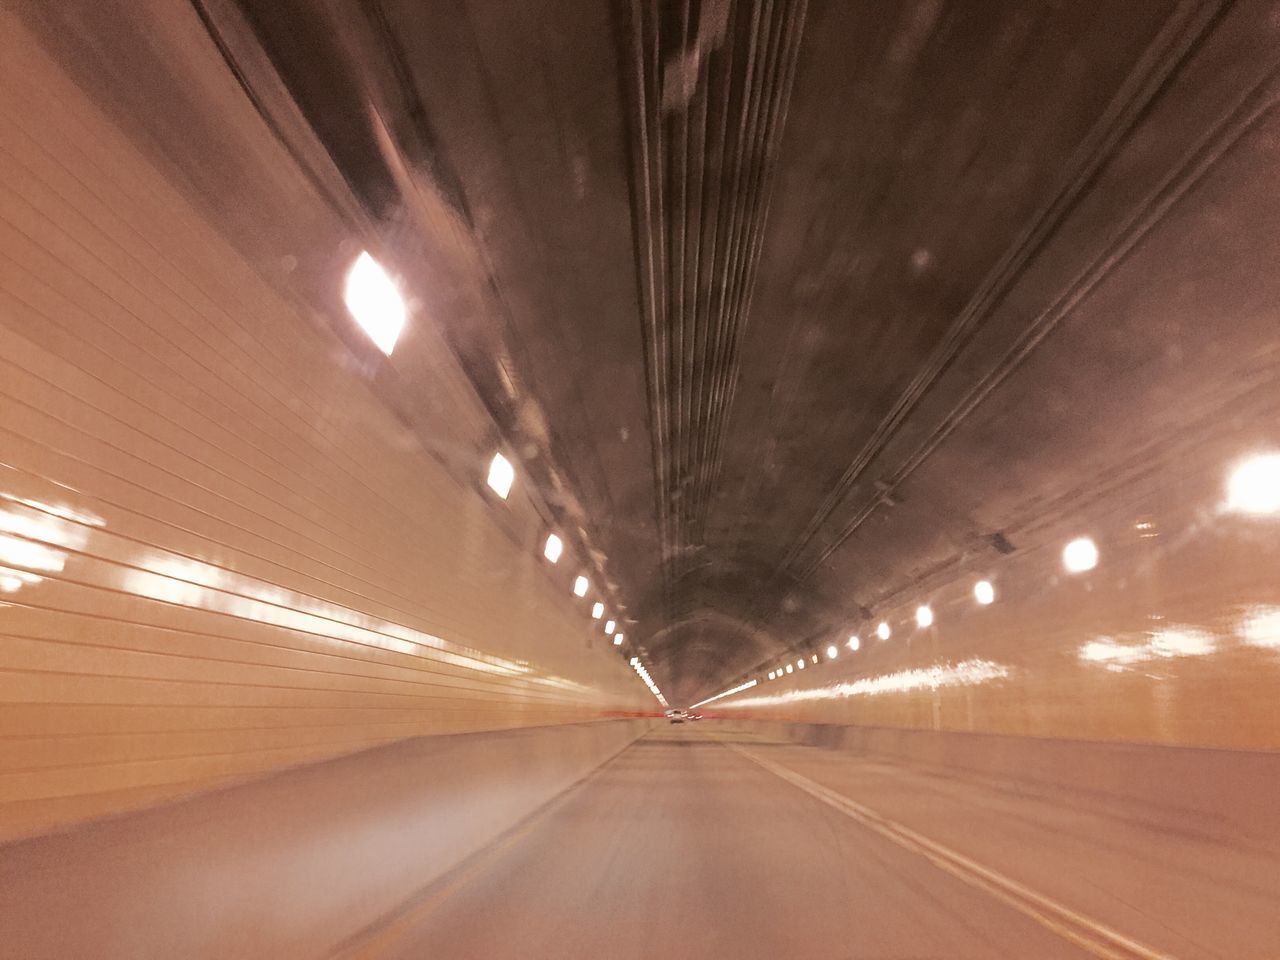 the way forward, diminishing perspective, illuminated, tunnel, vanishing point, indoors, transportation, road, lighting equipment, night, empty, architecture, built structure, ceiling, long, road marking, no people, light - natural phenomenon, empty road, electric light